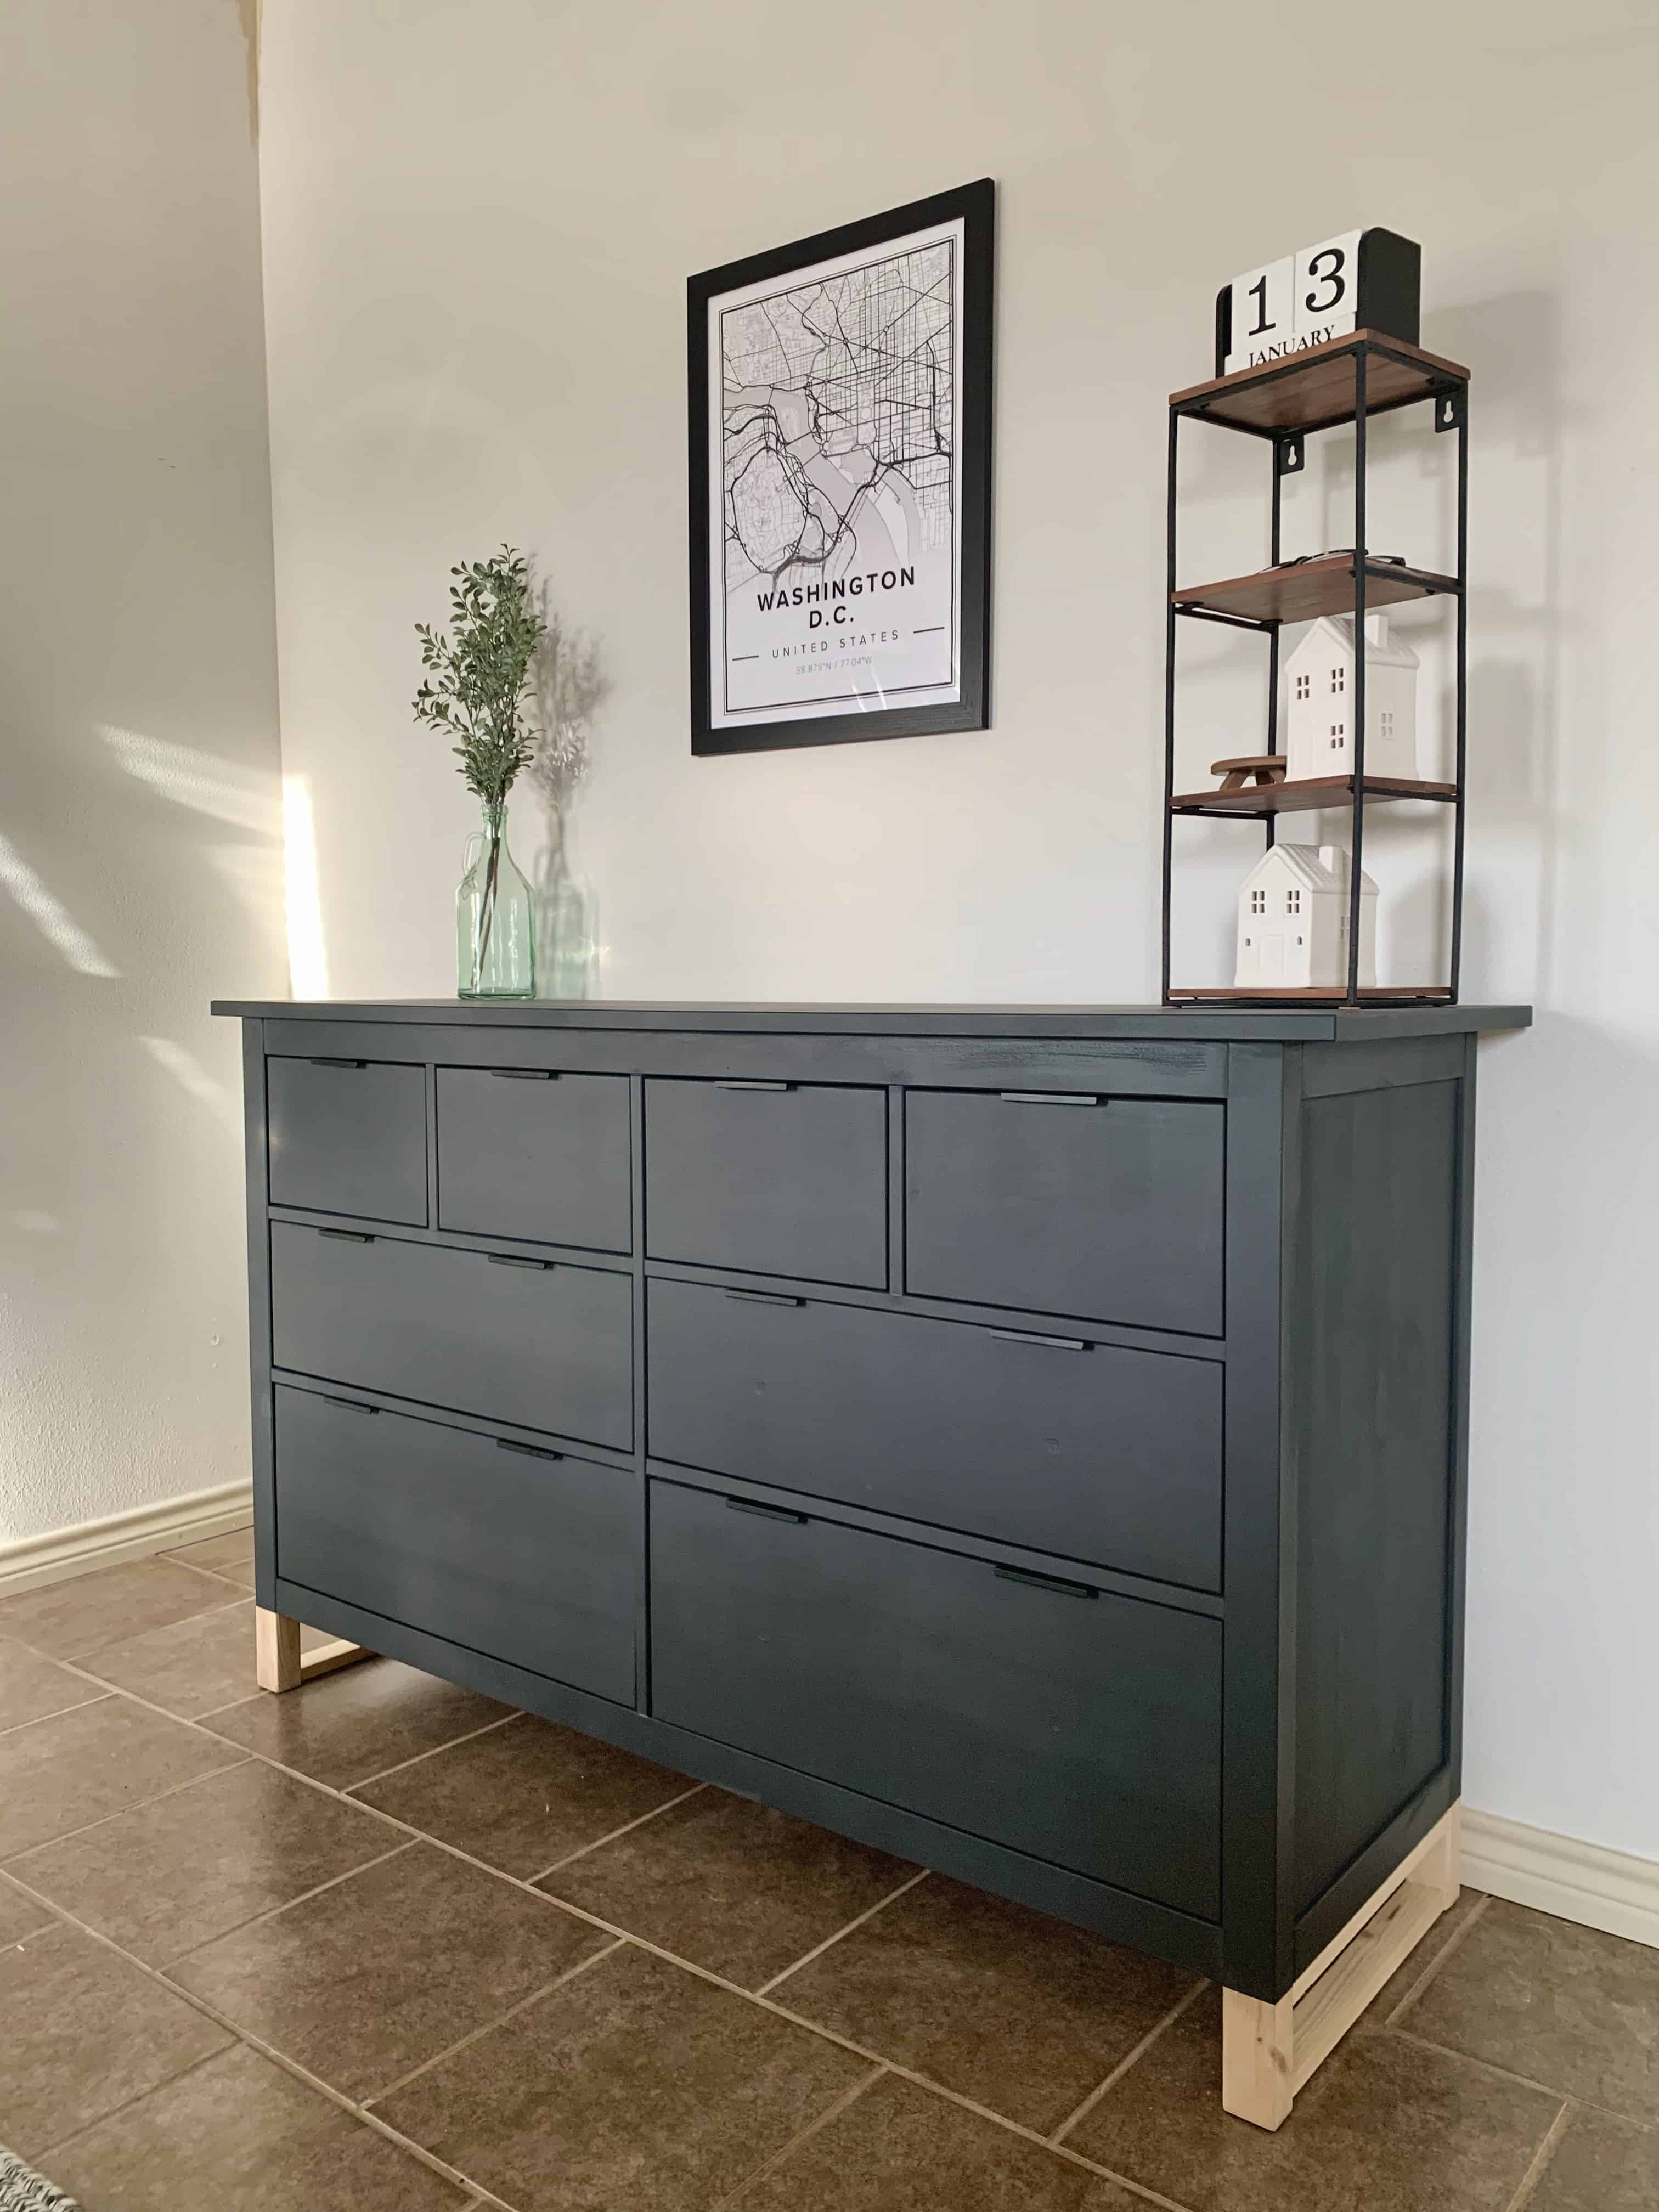 A Review of My New Go-to Chalk Paint - Angela Marie Made